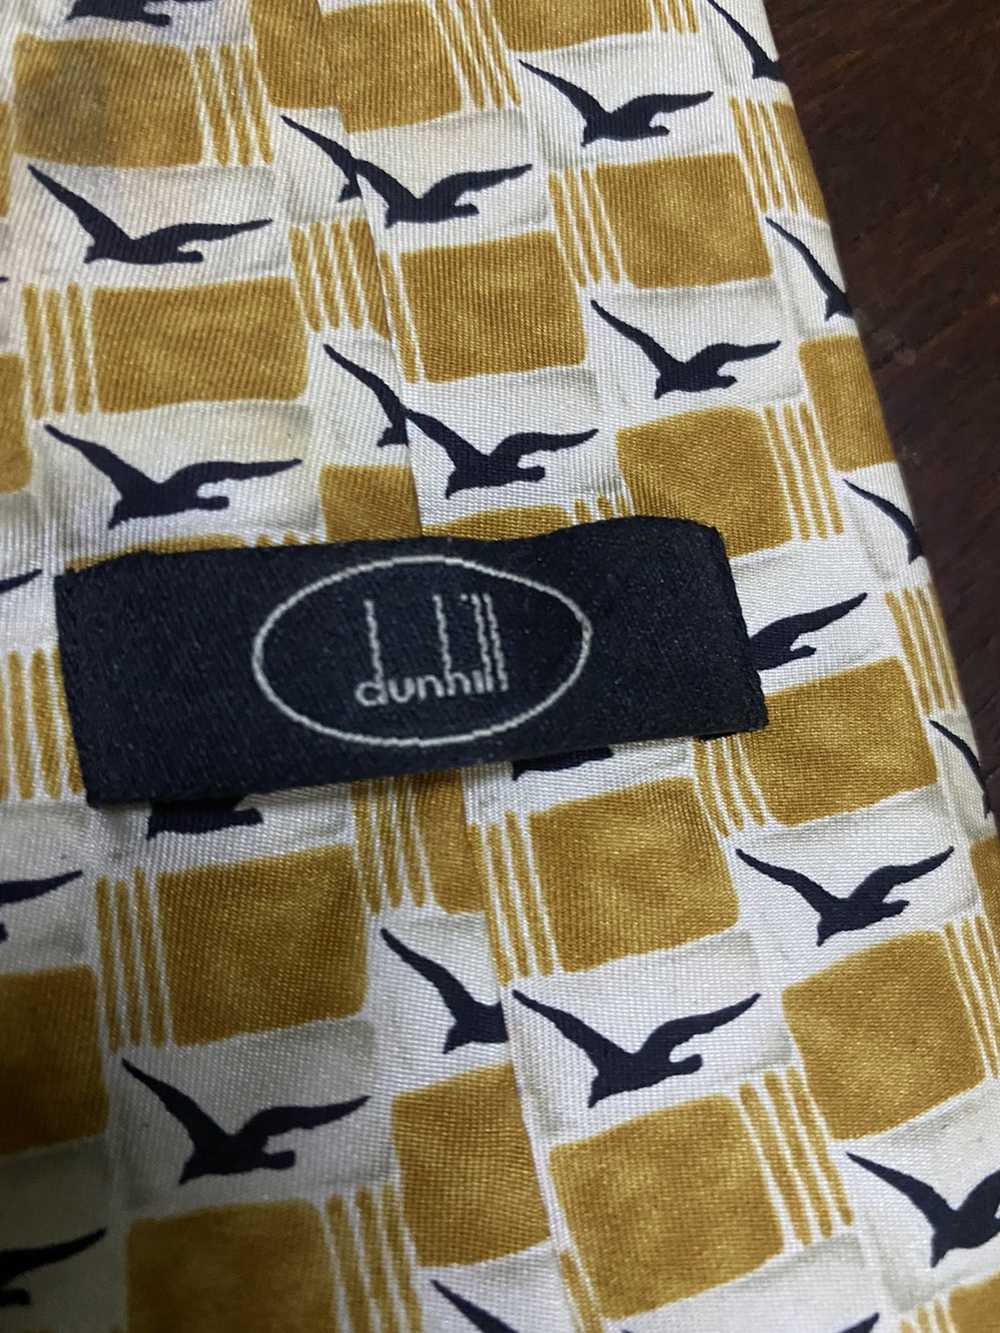 Other × Vintage Vintage dunhill full print ties - image 2